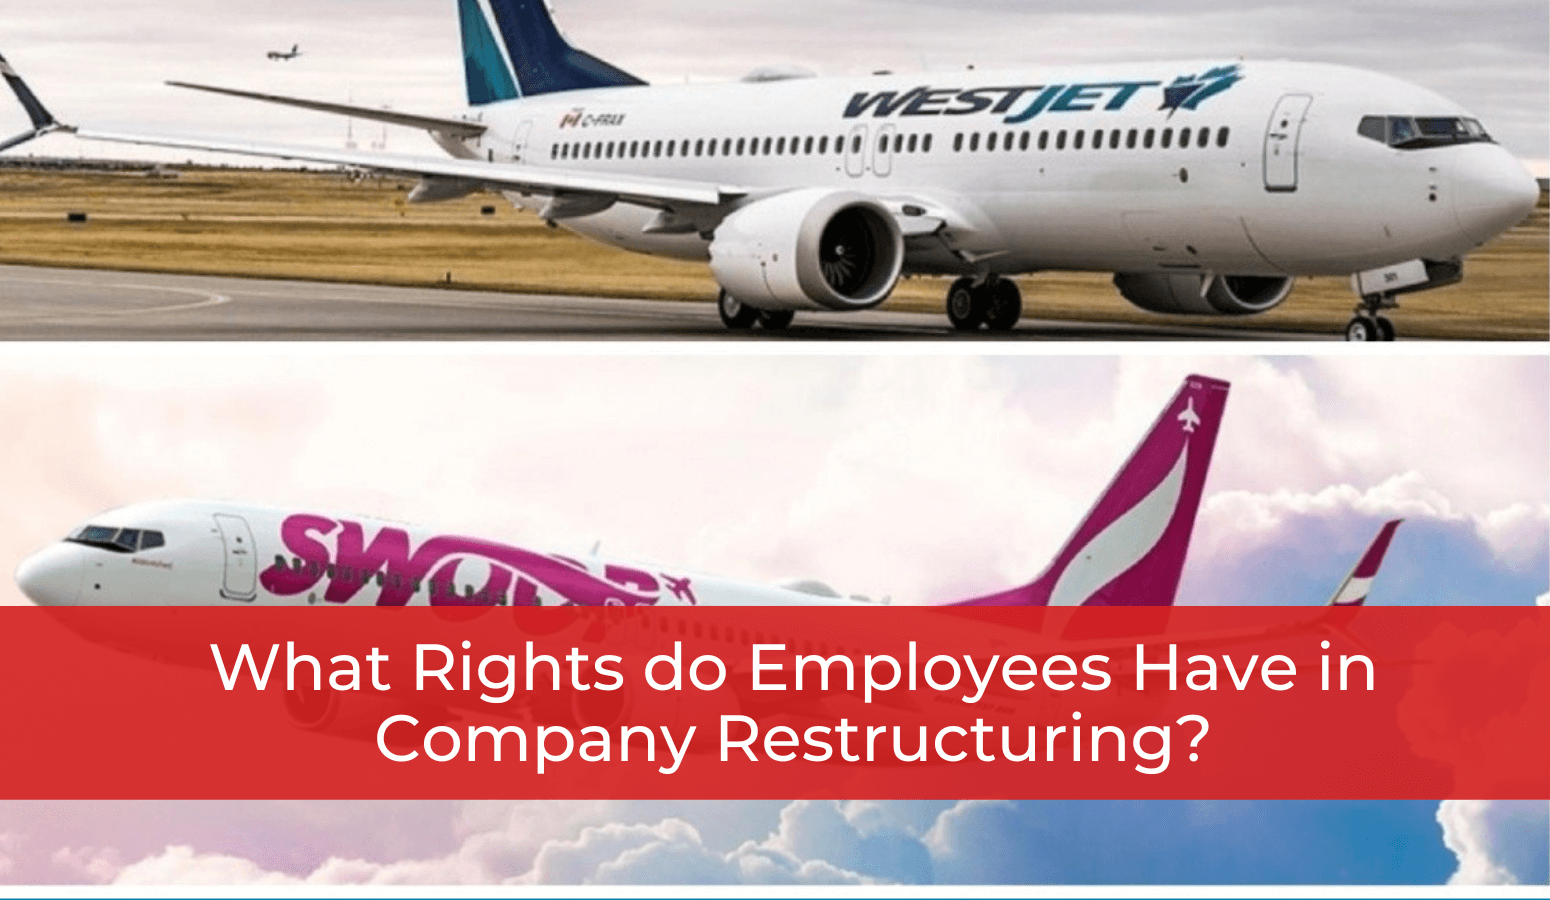 Featured image for “What Rights do Employees Have in Company Restructuring?”